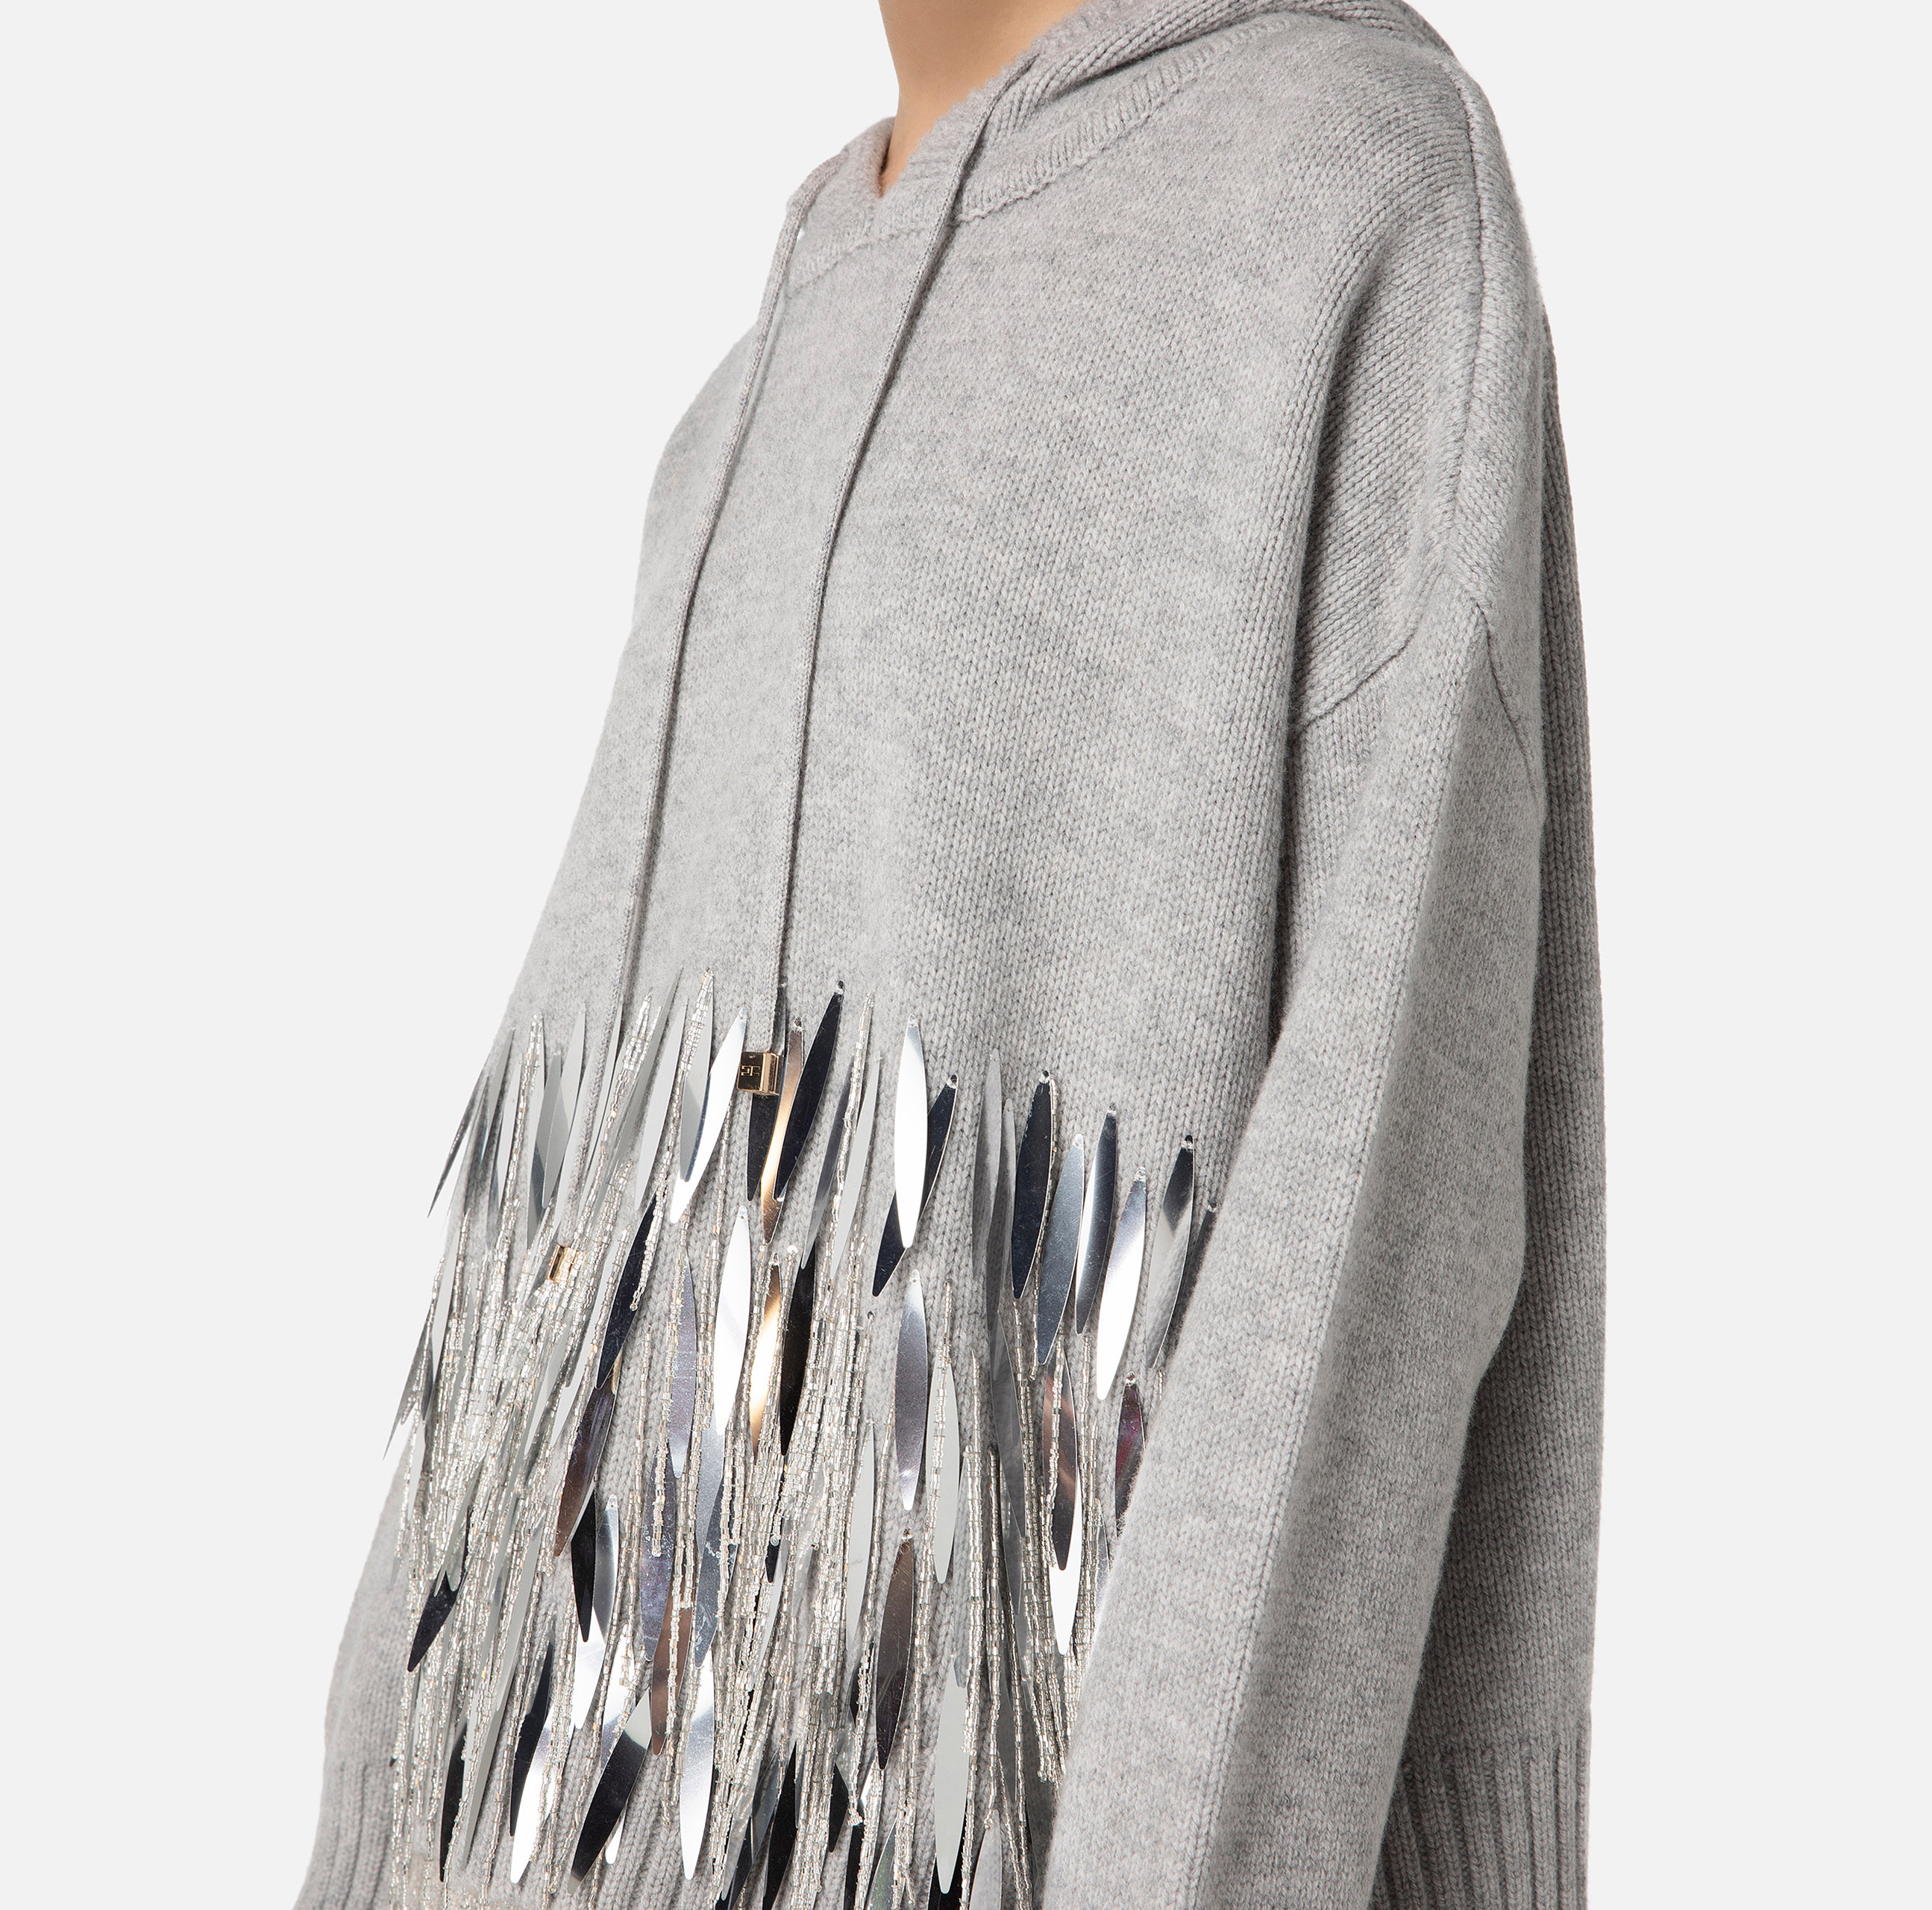 Wool oversized pullover with sequins - Elisabetta Franchi